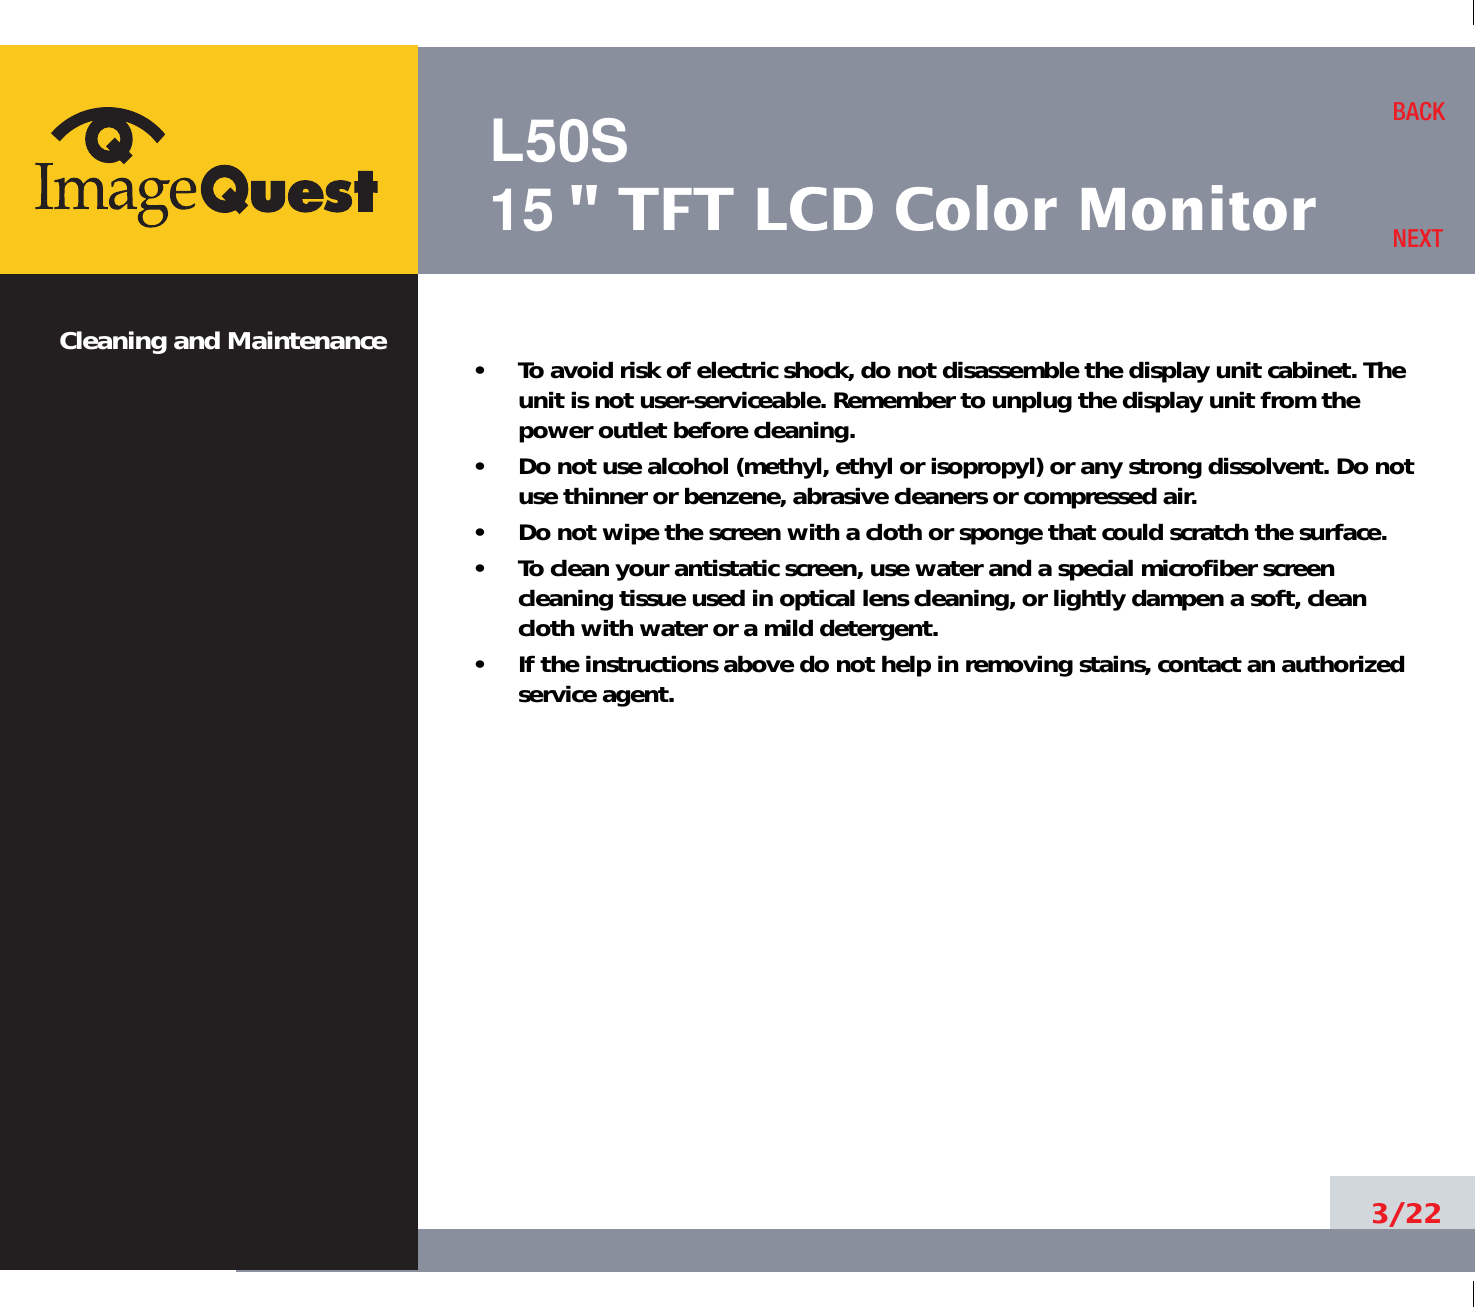 L50S15&quot; TFT LCD Color MonitorCleaning and Maintenance •     To avoid risk of electric shock, do not disassemble the display unit cabinet. Theunit is not user-serviceable. Remember to unplug the display unit from thepower outlet before cleaning.•     Do not use alcohol (methyl, ethyl or isopropyl) or any strong dissolvent. Do notuse thinner or benzene, abrasive cleaners or compressed air.•     Do not wipe the screen with a cloth or sponge that could scratch the surface.•     To clean your antistatic screen, use water and a special microfiber screencleaning tissue used in optical lens cleaning, or lightly dampen a soft, cleancloth with water or a mild detergent.•     If the instructions above do not help in removing stains, contact an authorizedservice agent. 3/22BACKNEXT